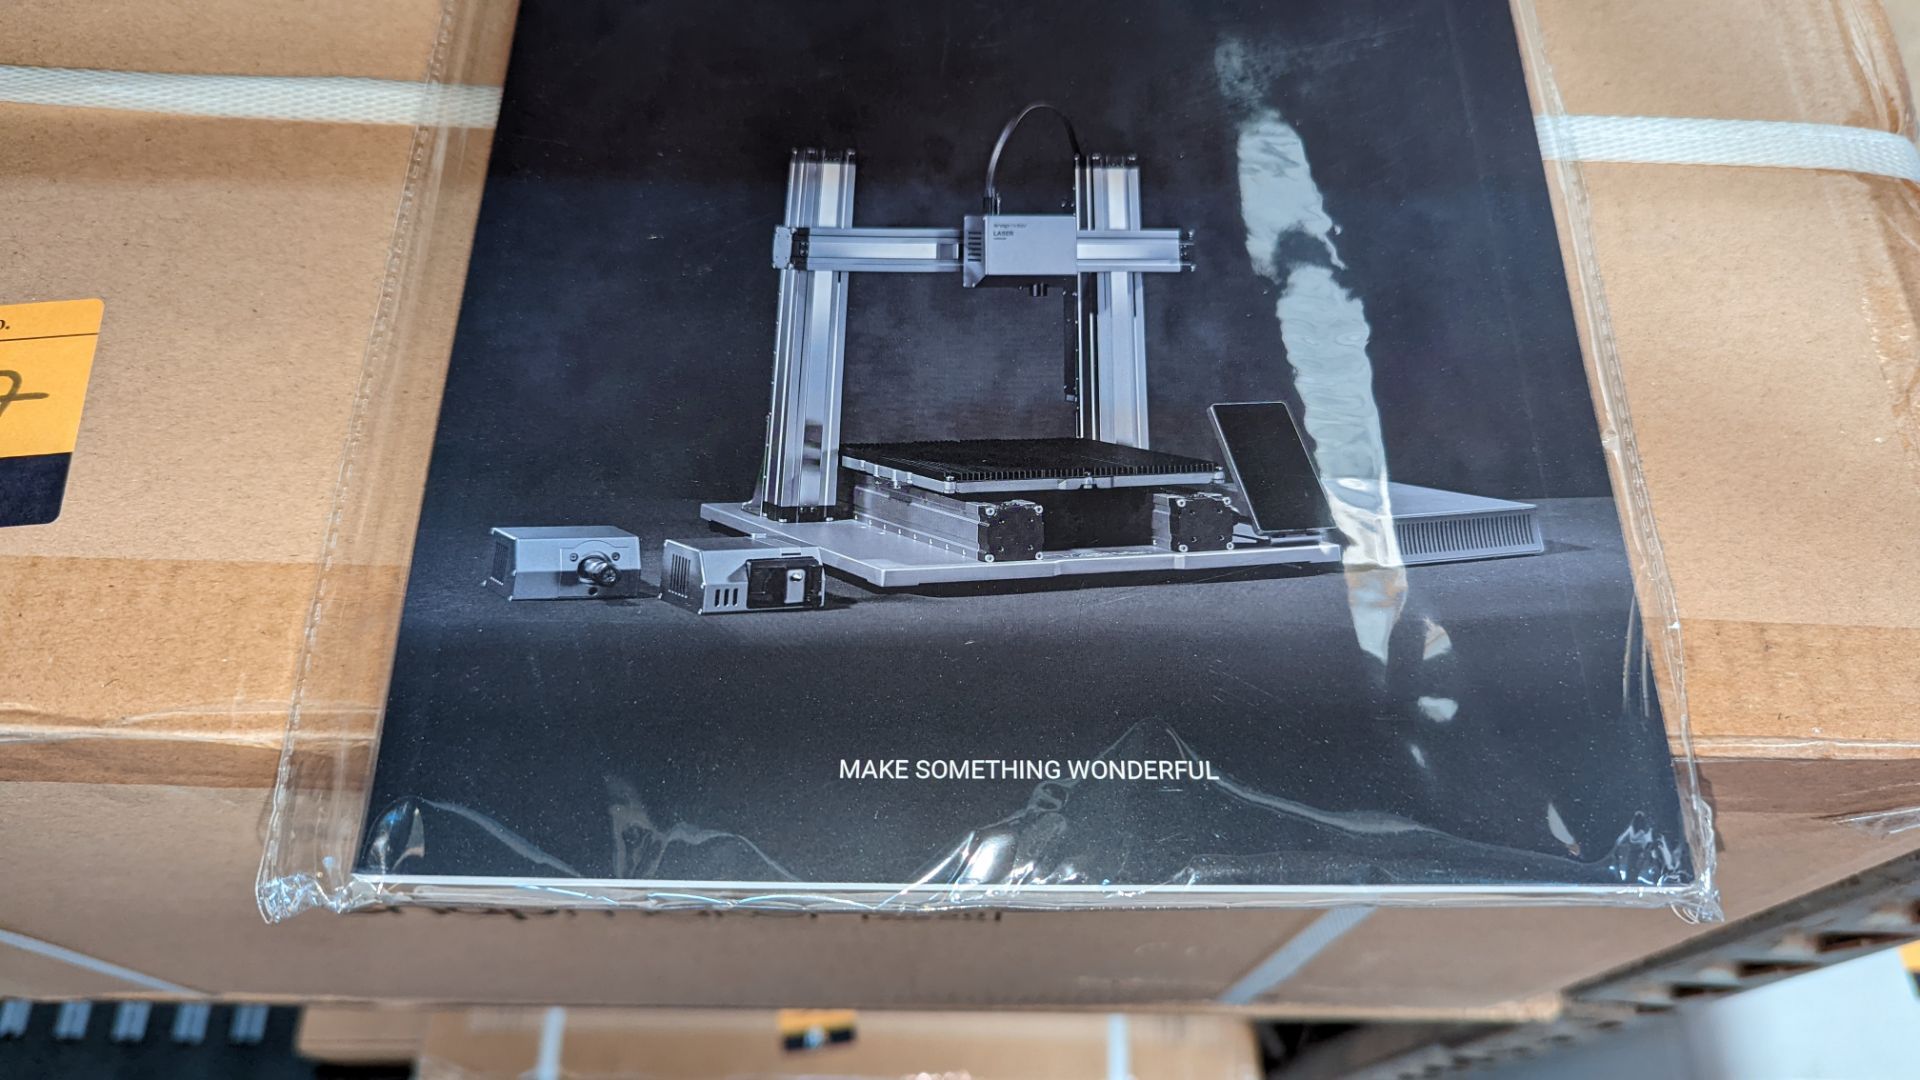 Snapmaker model A250 3D printer - boxed, delivered with original banding, assumed to be new/unused - Image 2 of 4